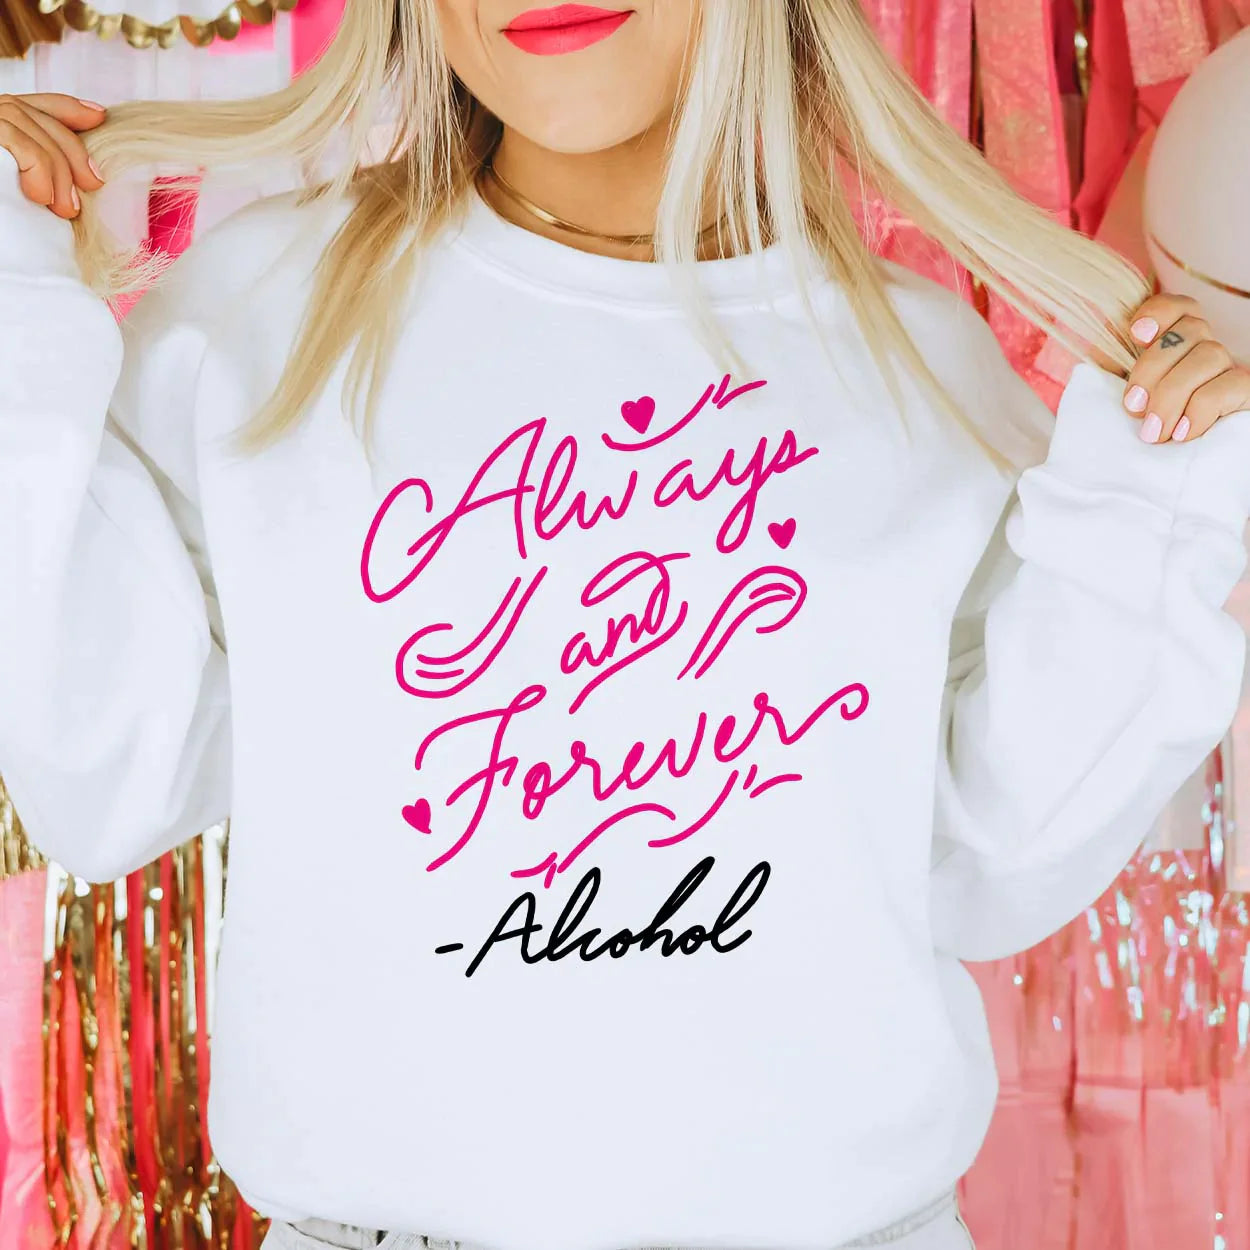 This white sweatshirt has a cursive graphic that says "Always and Forever" - Alcohol in hot pink and black. The model is wearing it paired with a gold choker-like necklace.